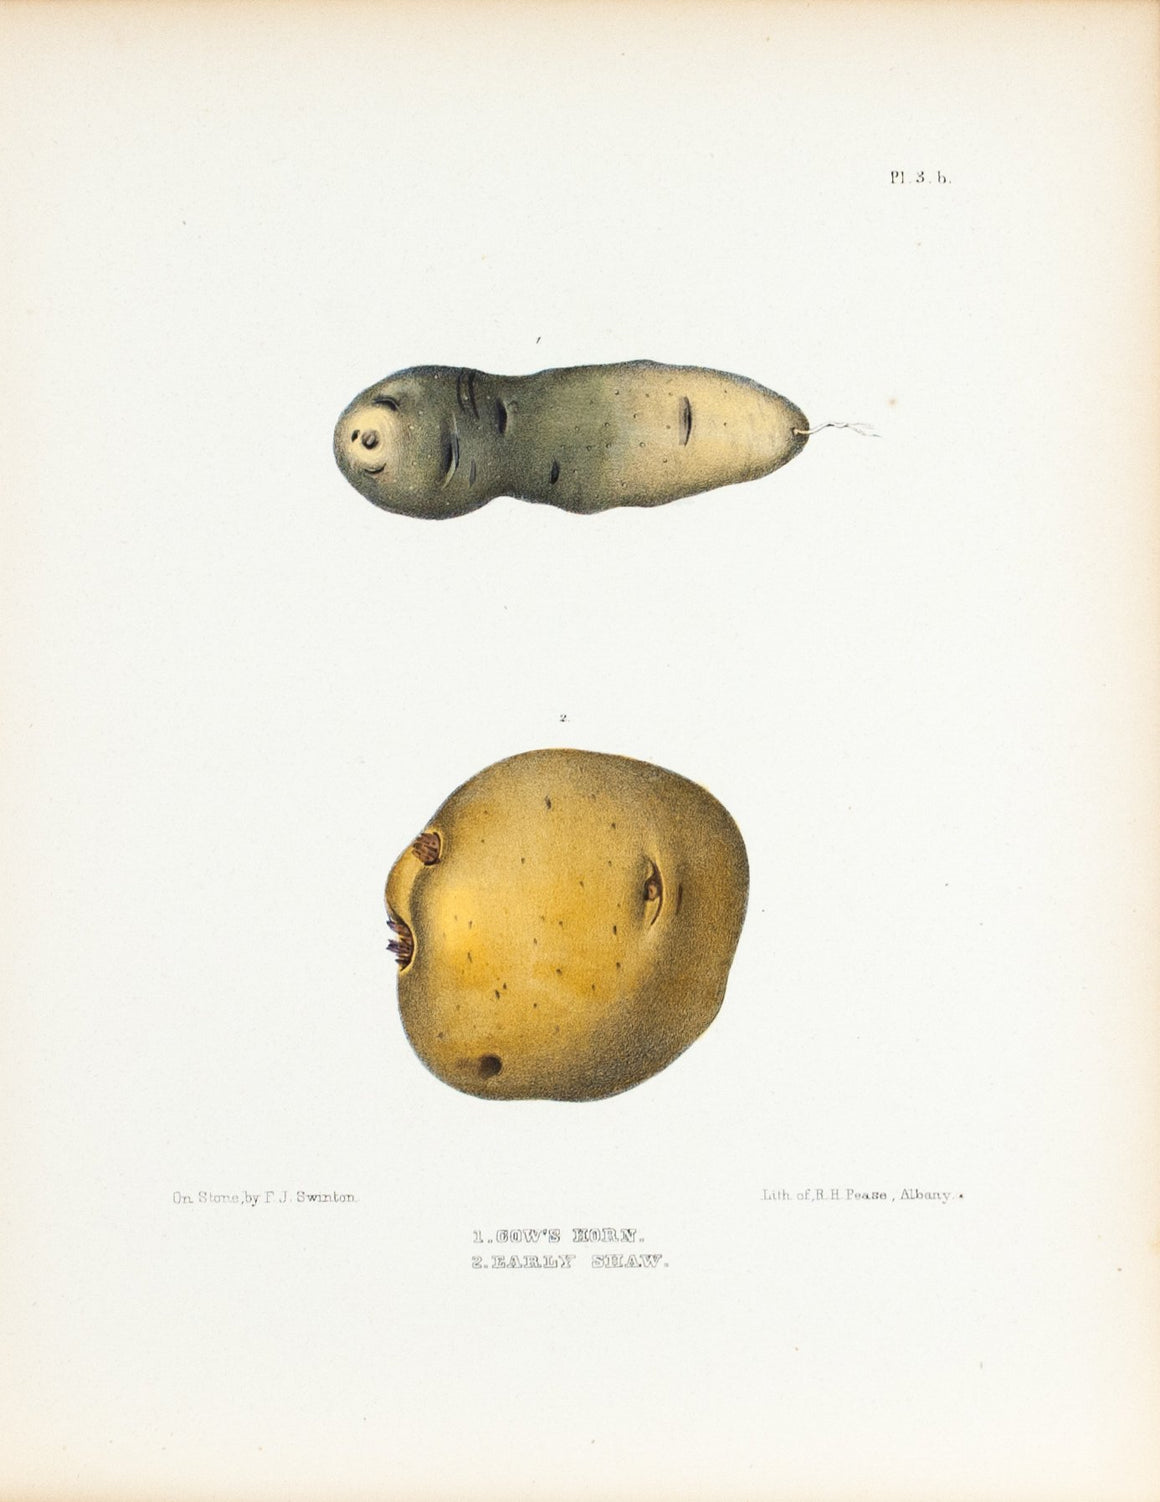 1849 Pl 3 b. Cow's Horn, Early Shaw - Emmons 